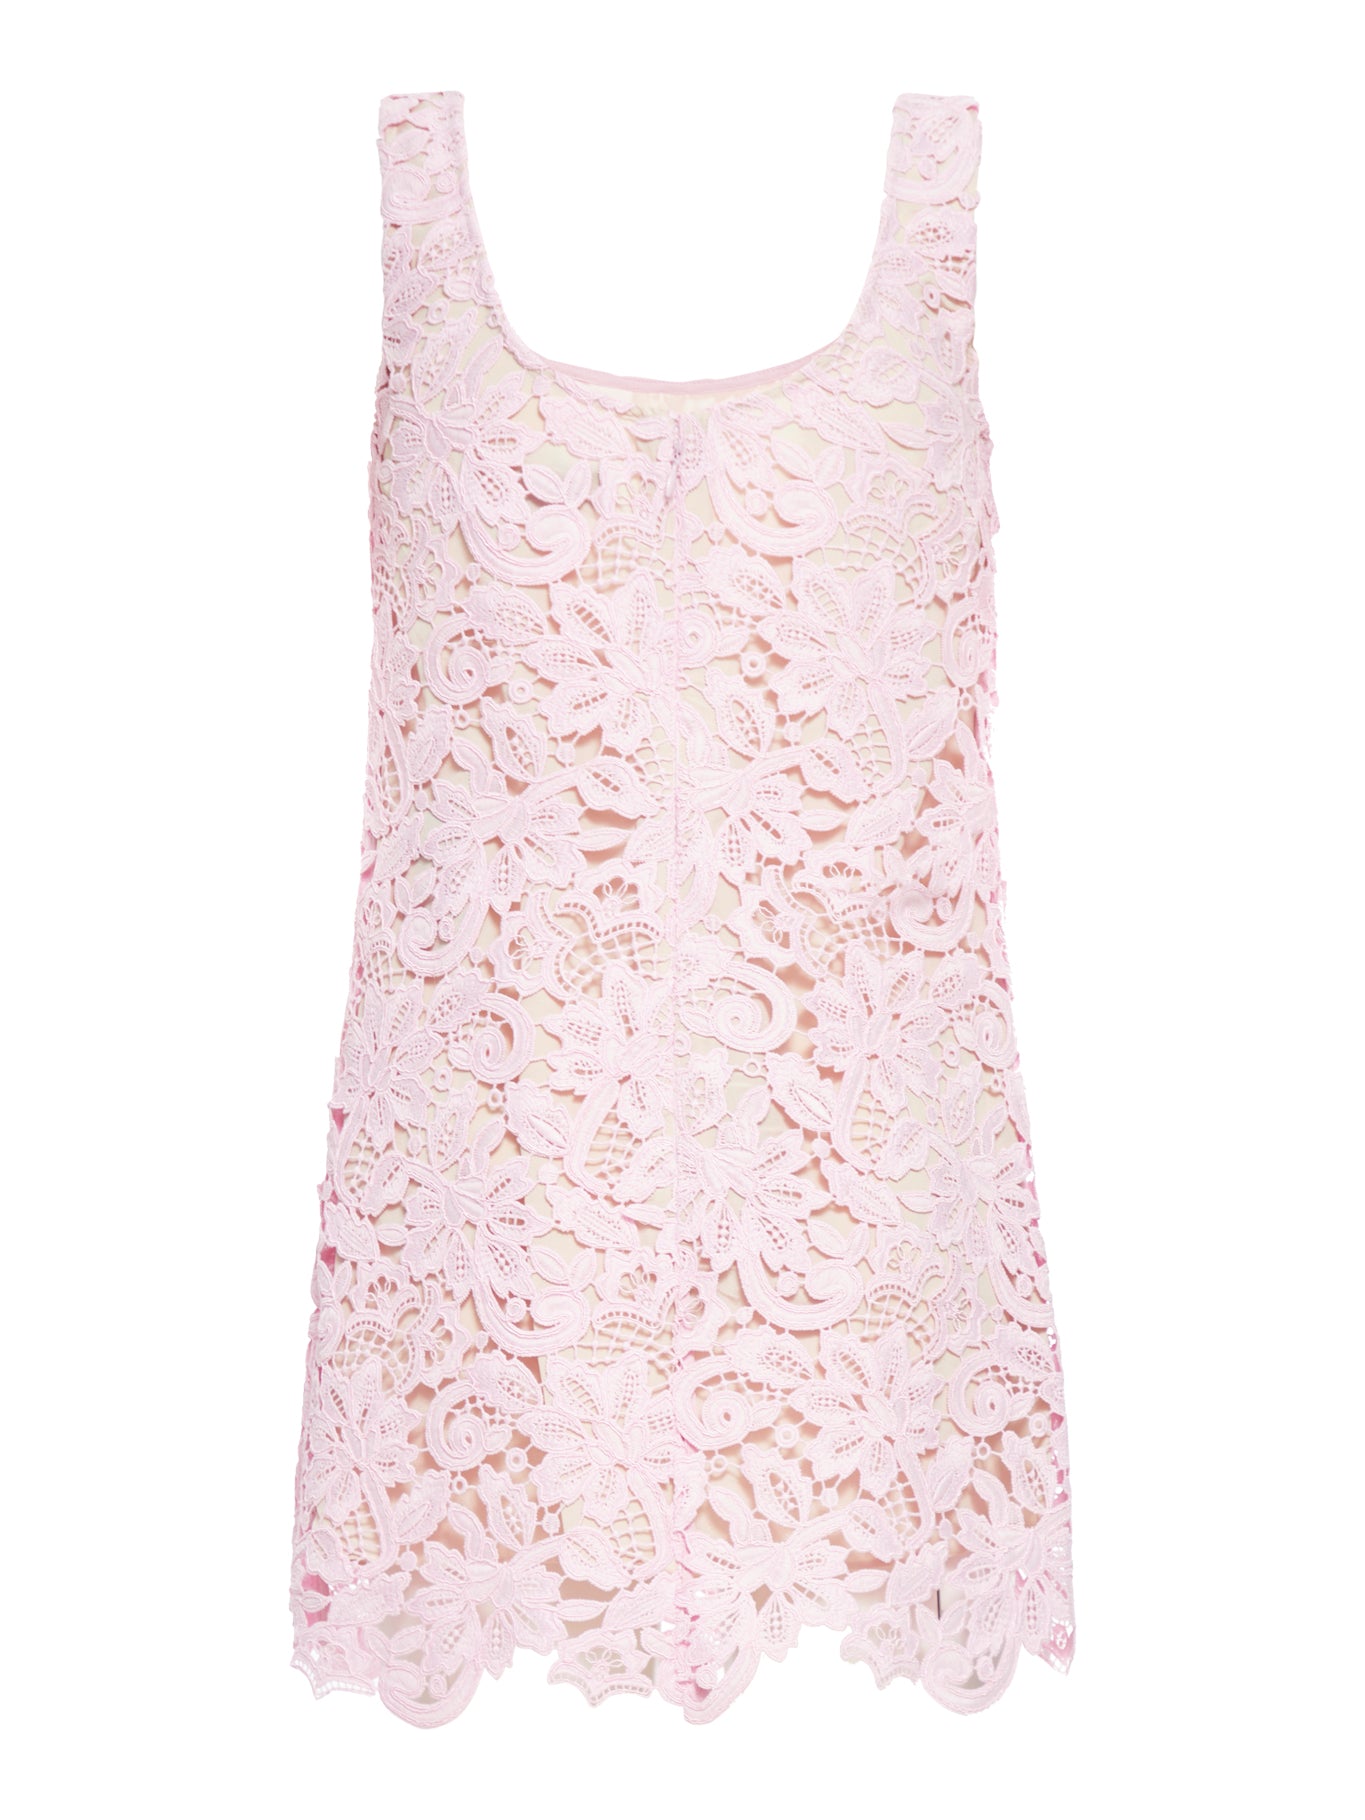 LACE MINIDRESS IN PINK